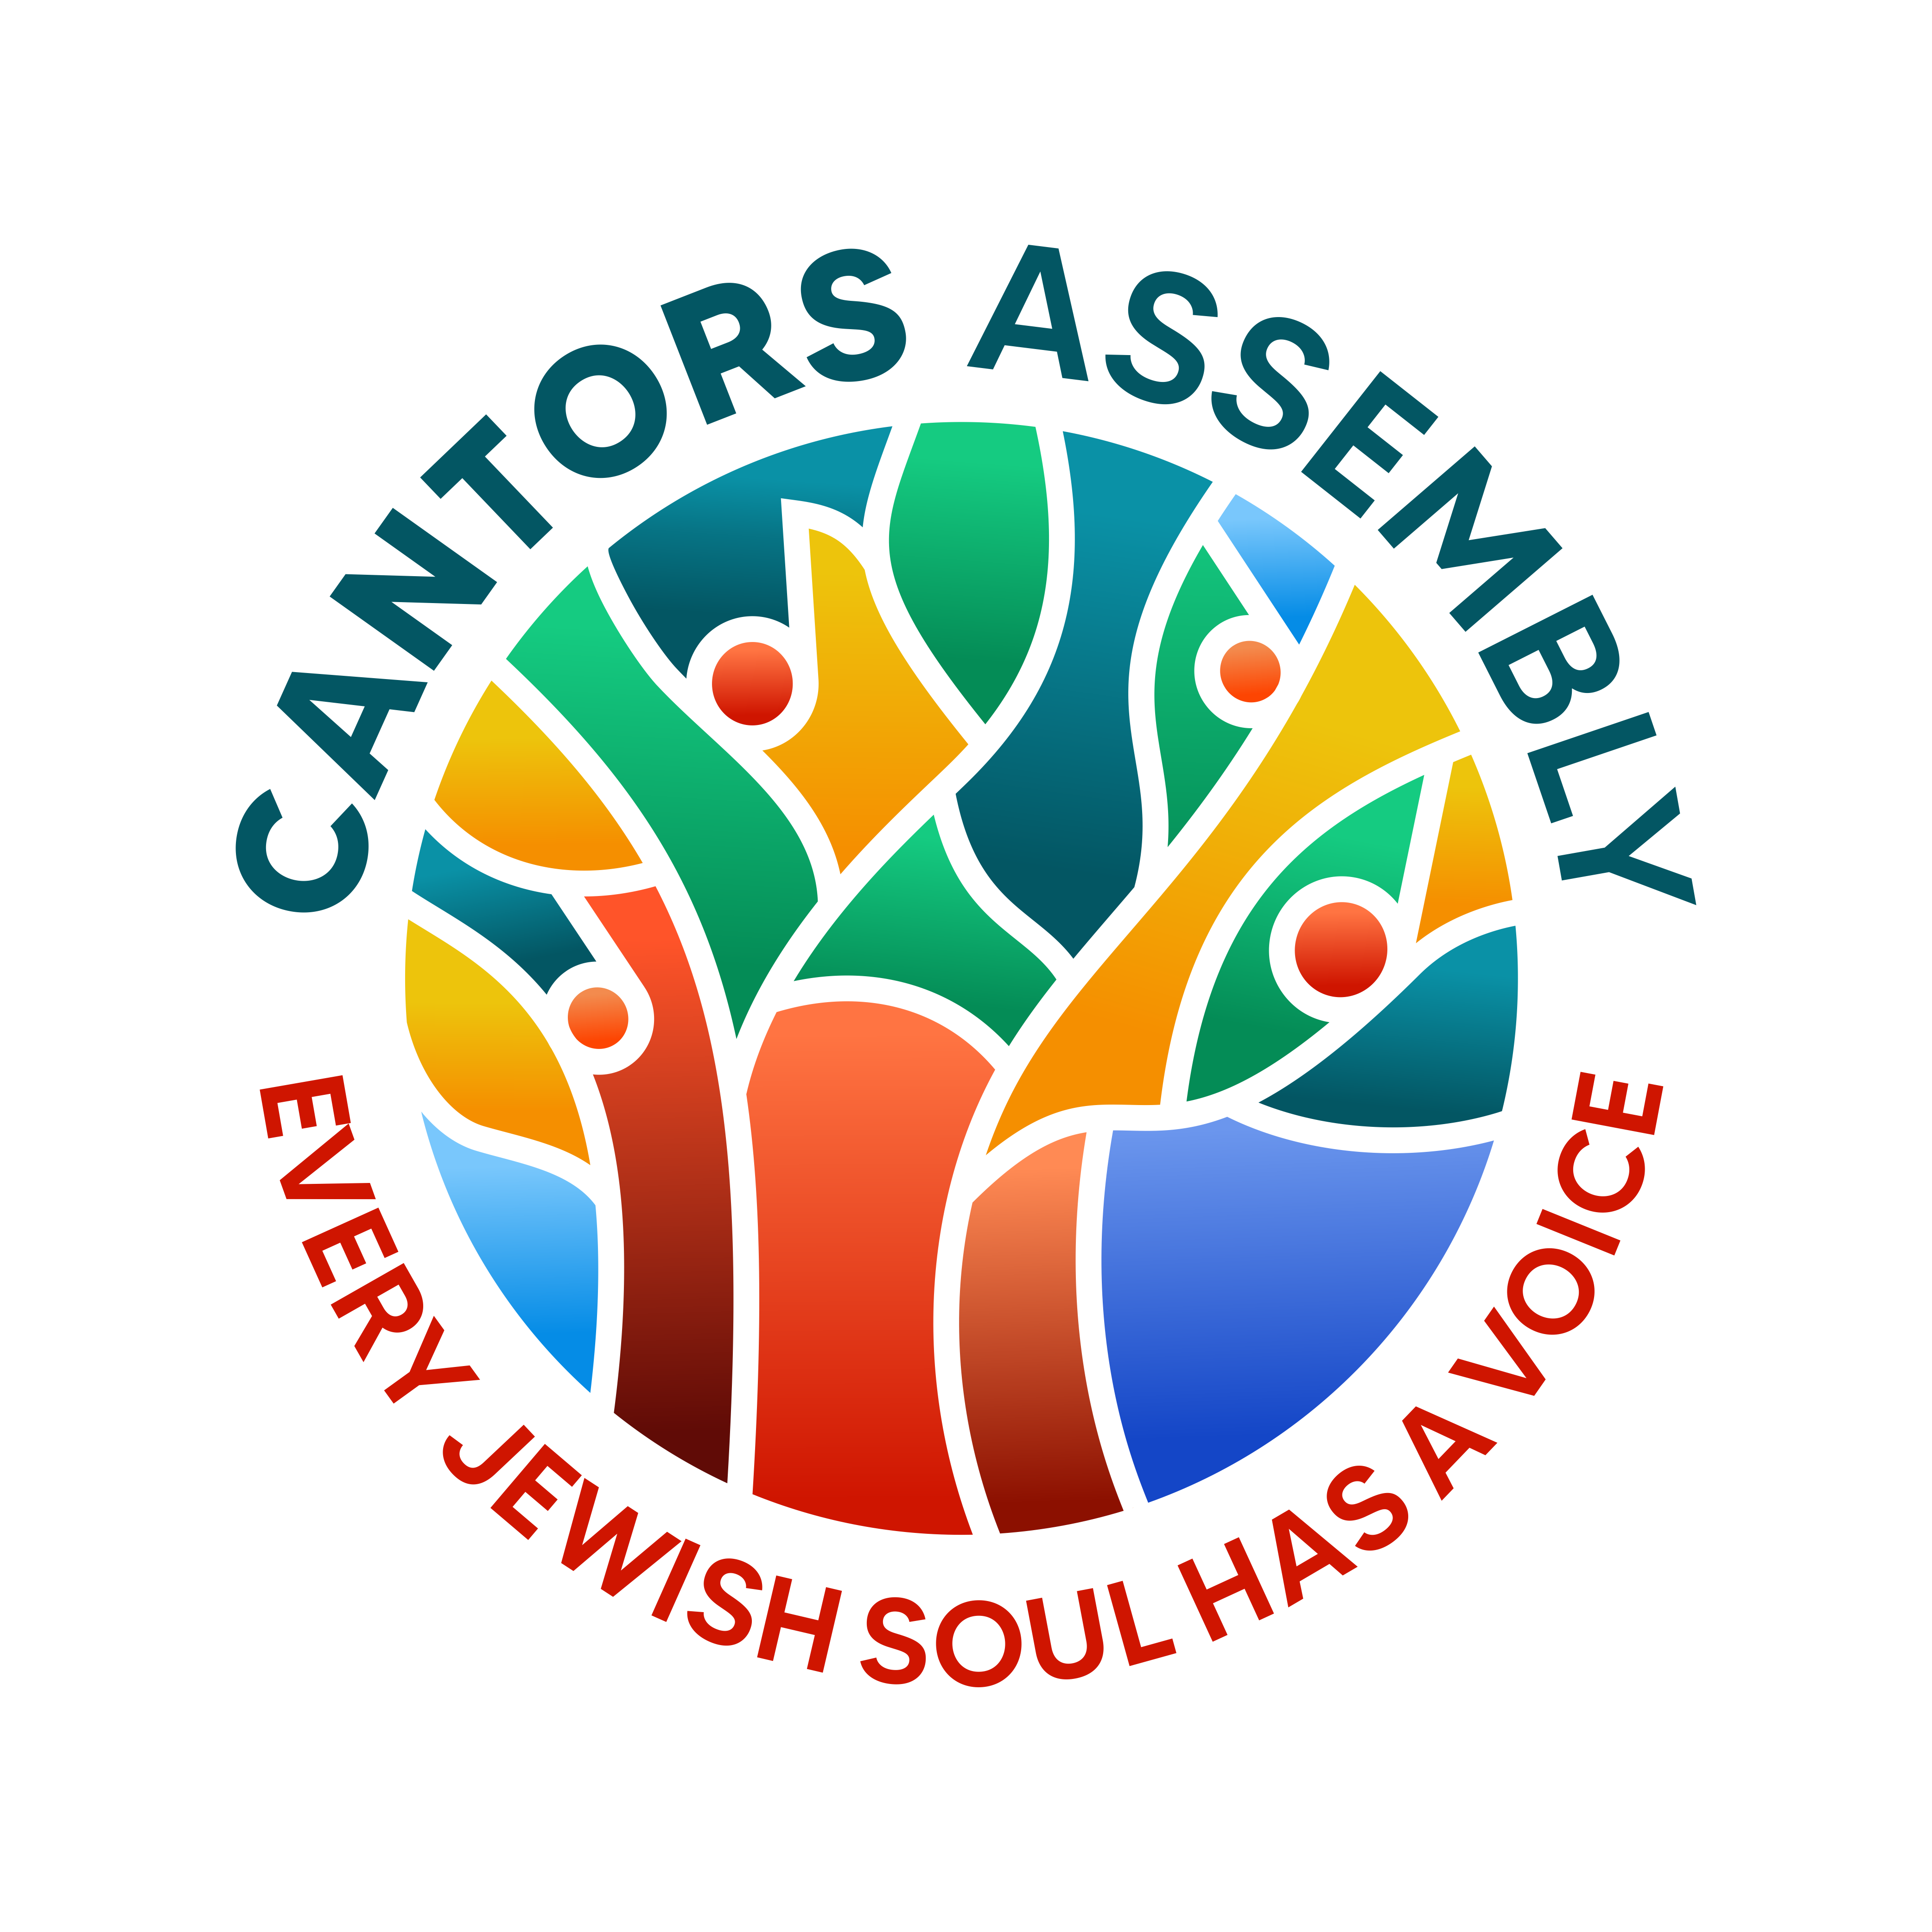 Cantors Assembly logo